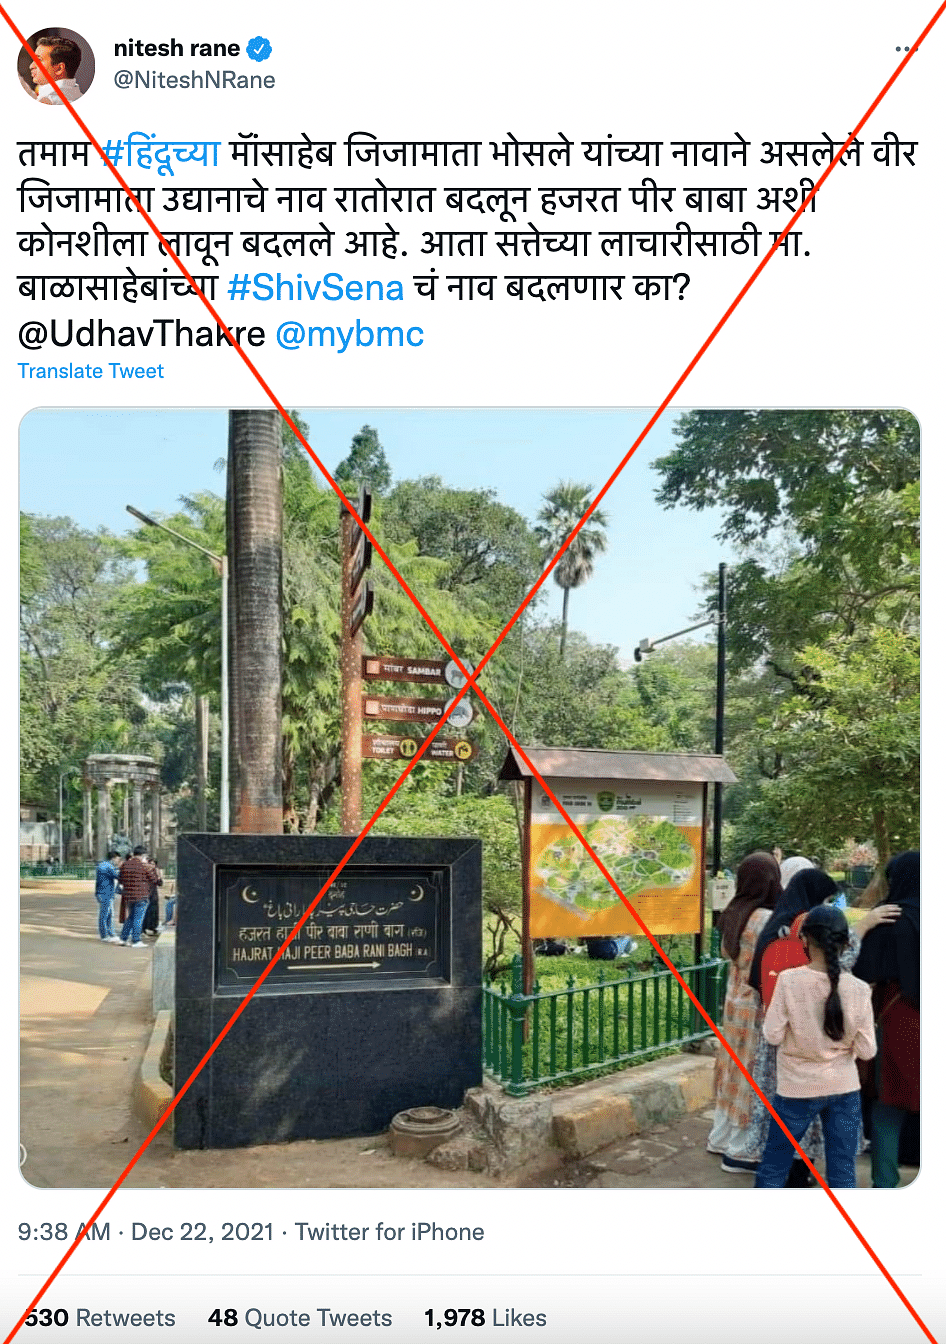 The zoo's Twitter account clarified that the pic showed a directional board and that the zoo's name had not changed.